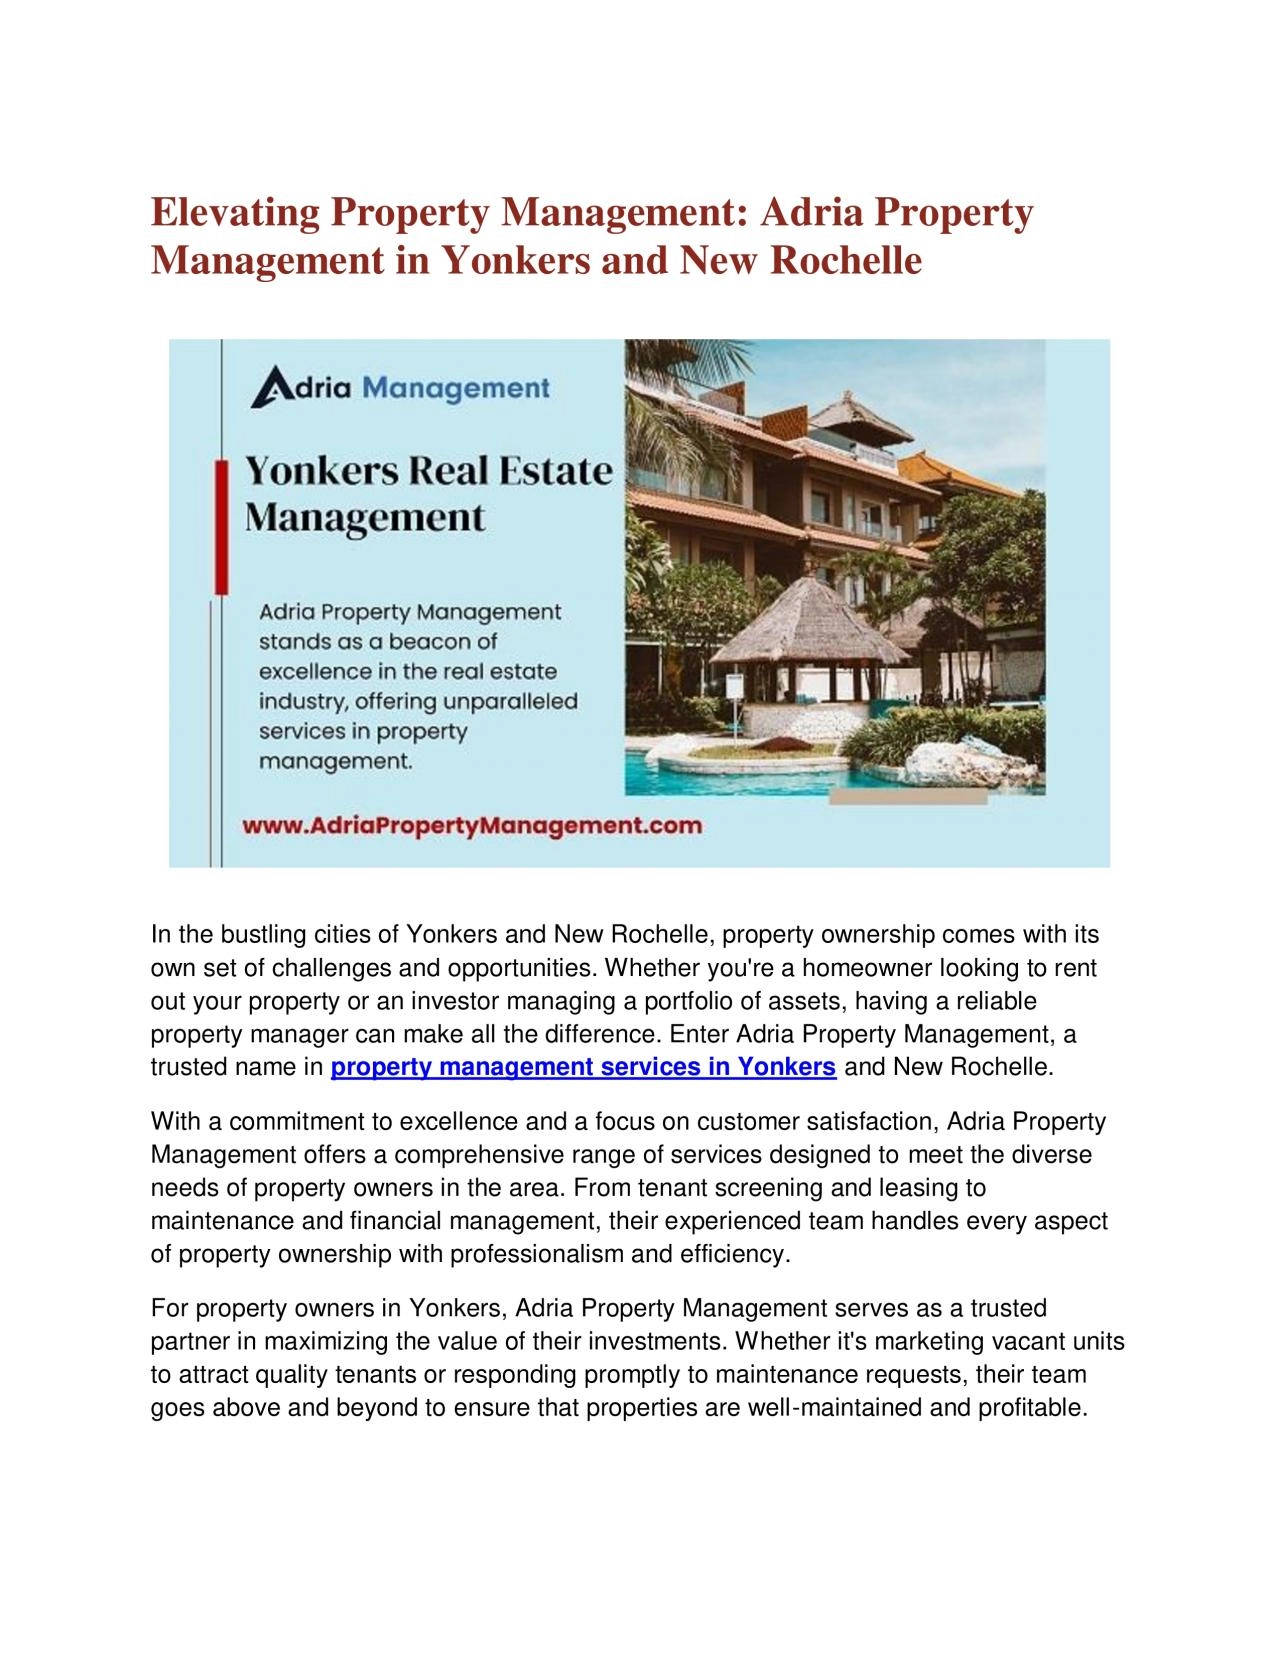 Elevating Property Management: Adria Property Management in Yonkers and New Rochelle